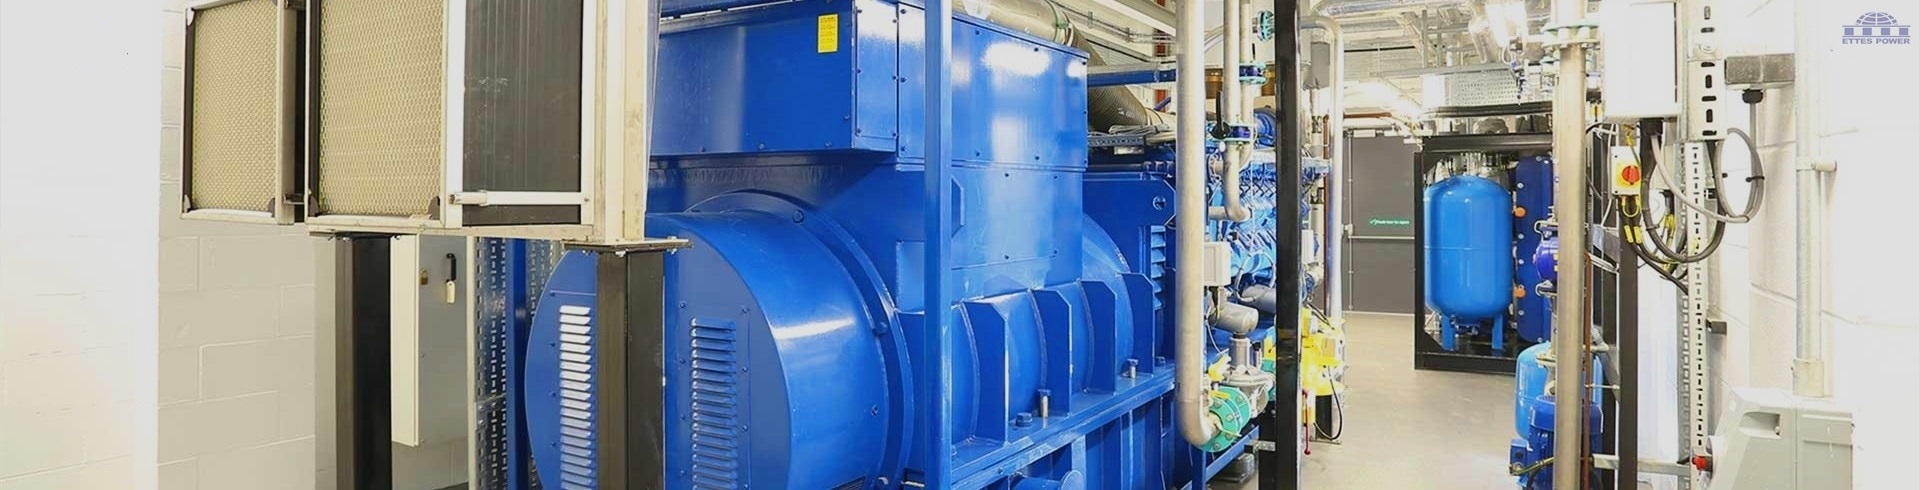 MWM 800kW 1MW biogas engine generator combined heat and power CHP ETTES POWER